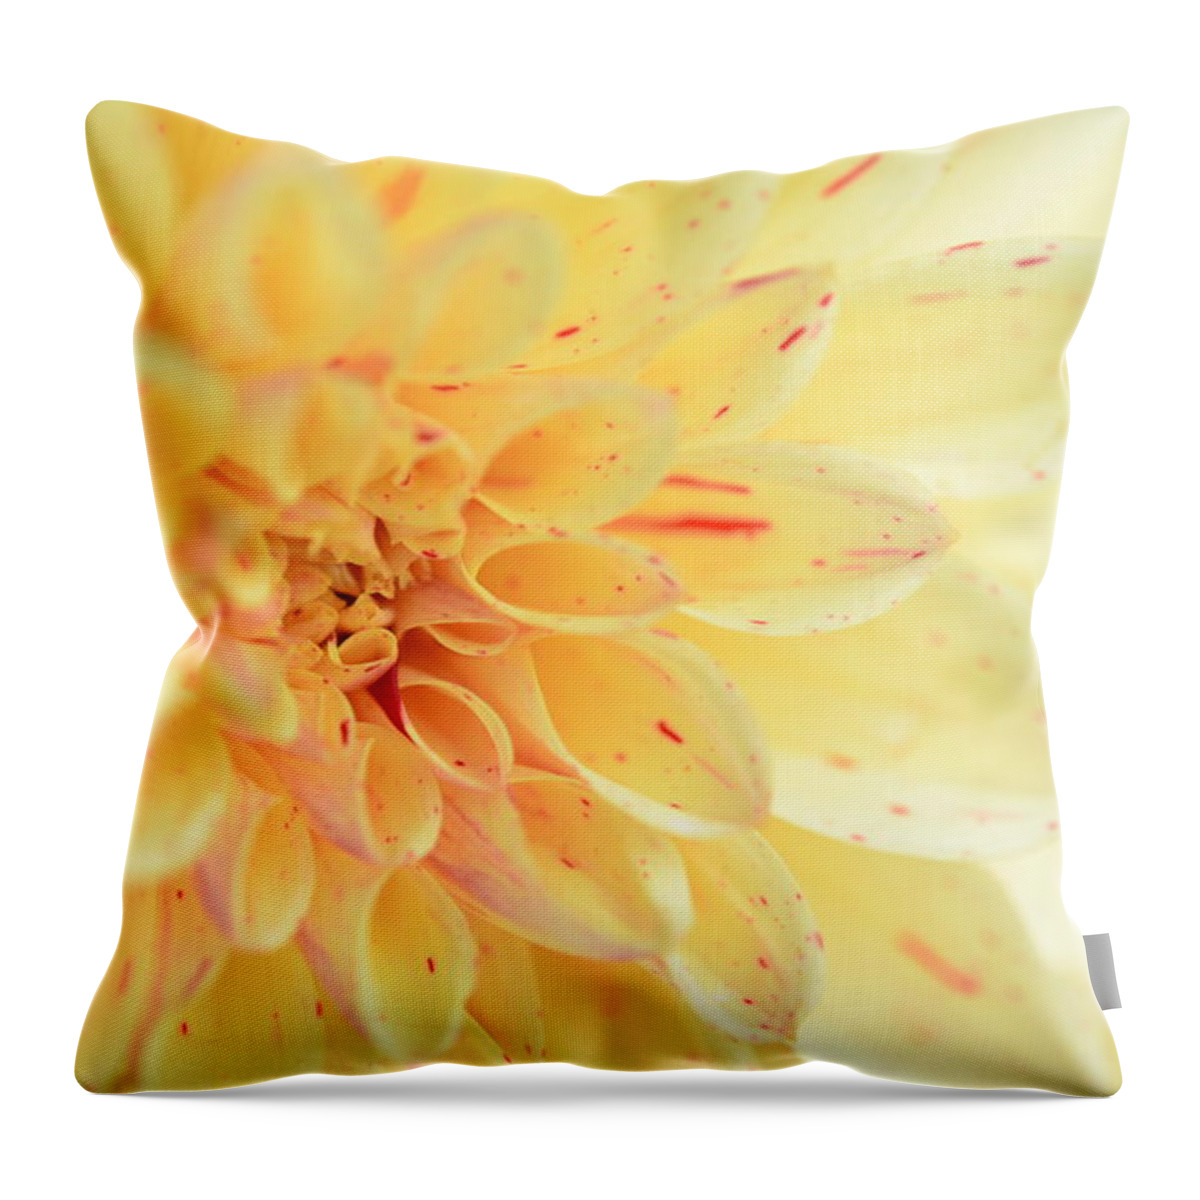 Dahlia Throw Pillow featuring the photograph Joyce's Yellow Speckled Dahlia by Kathy Paynter